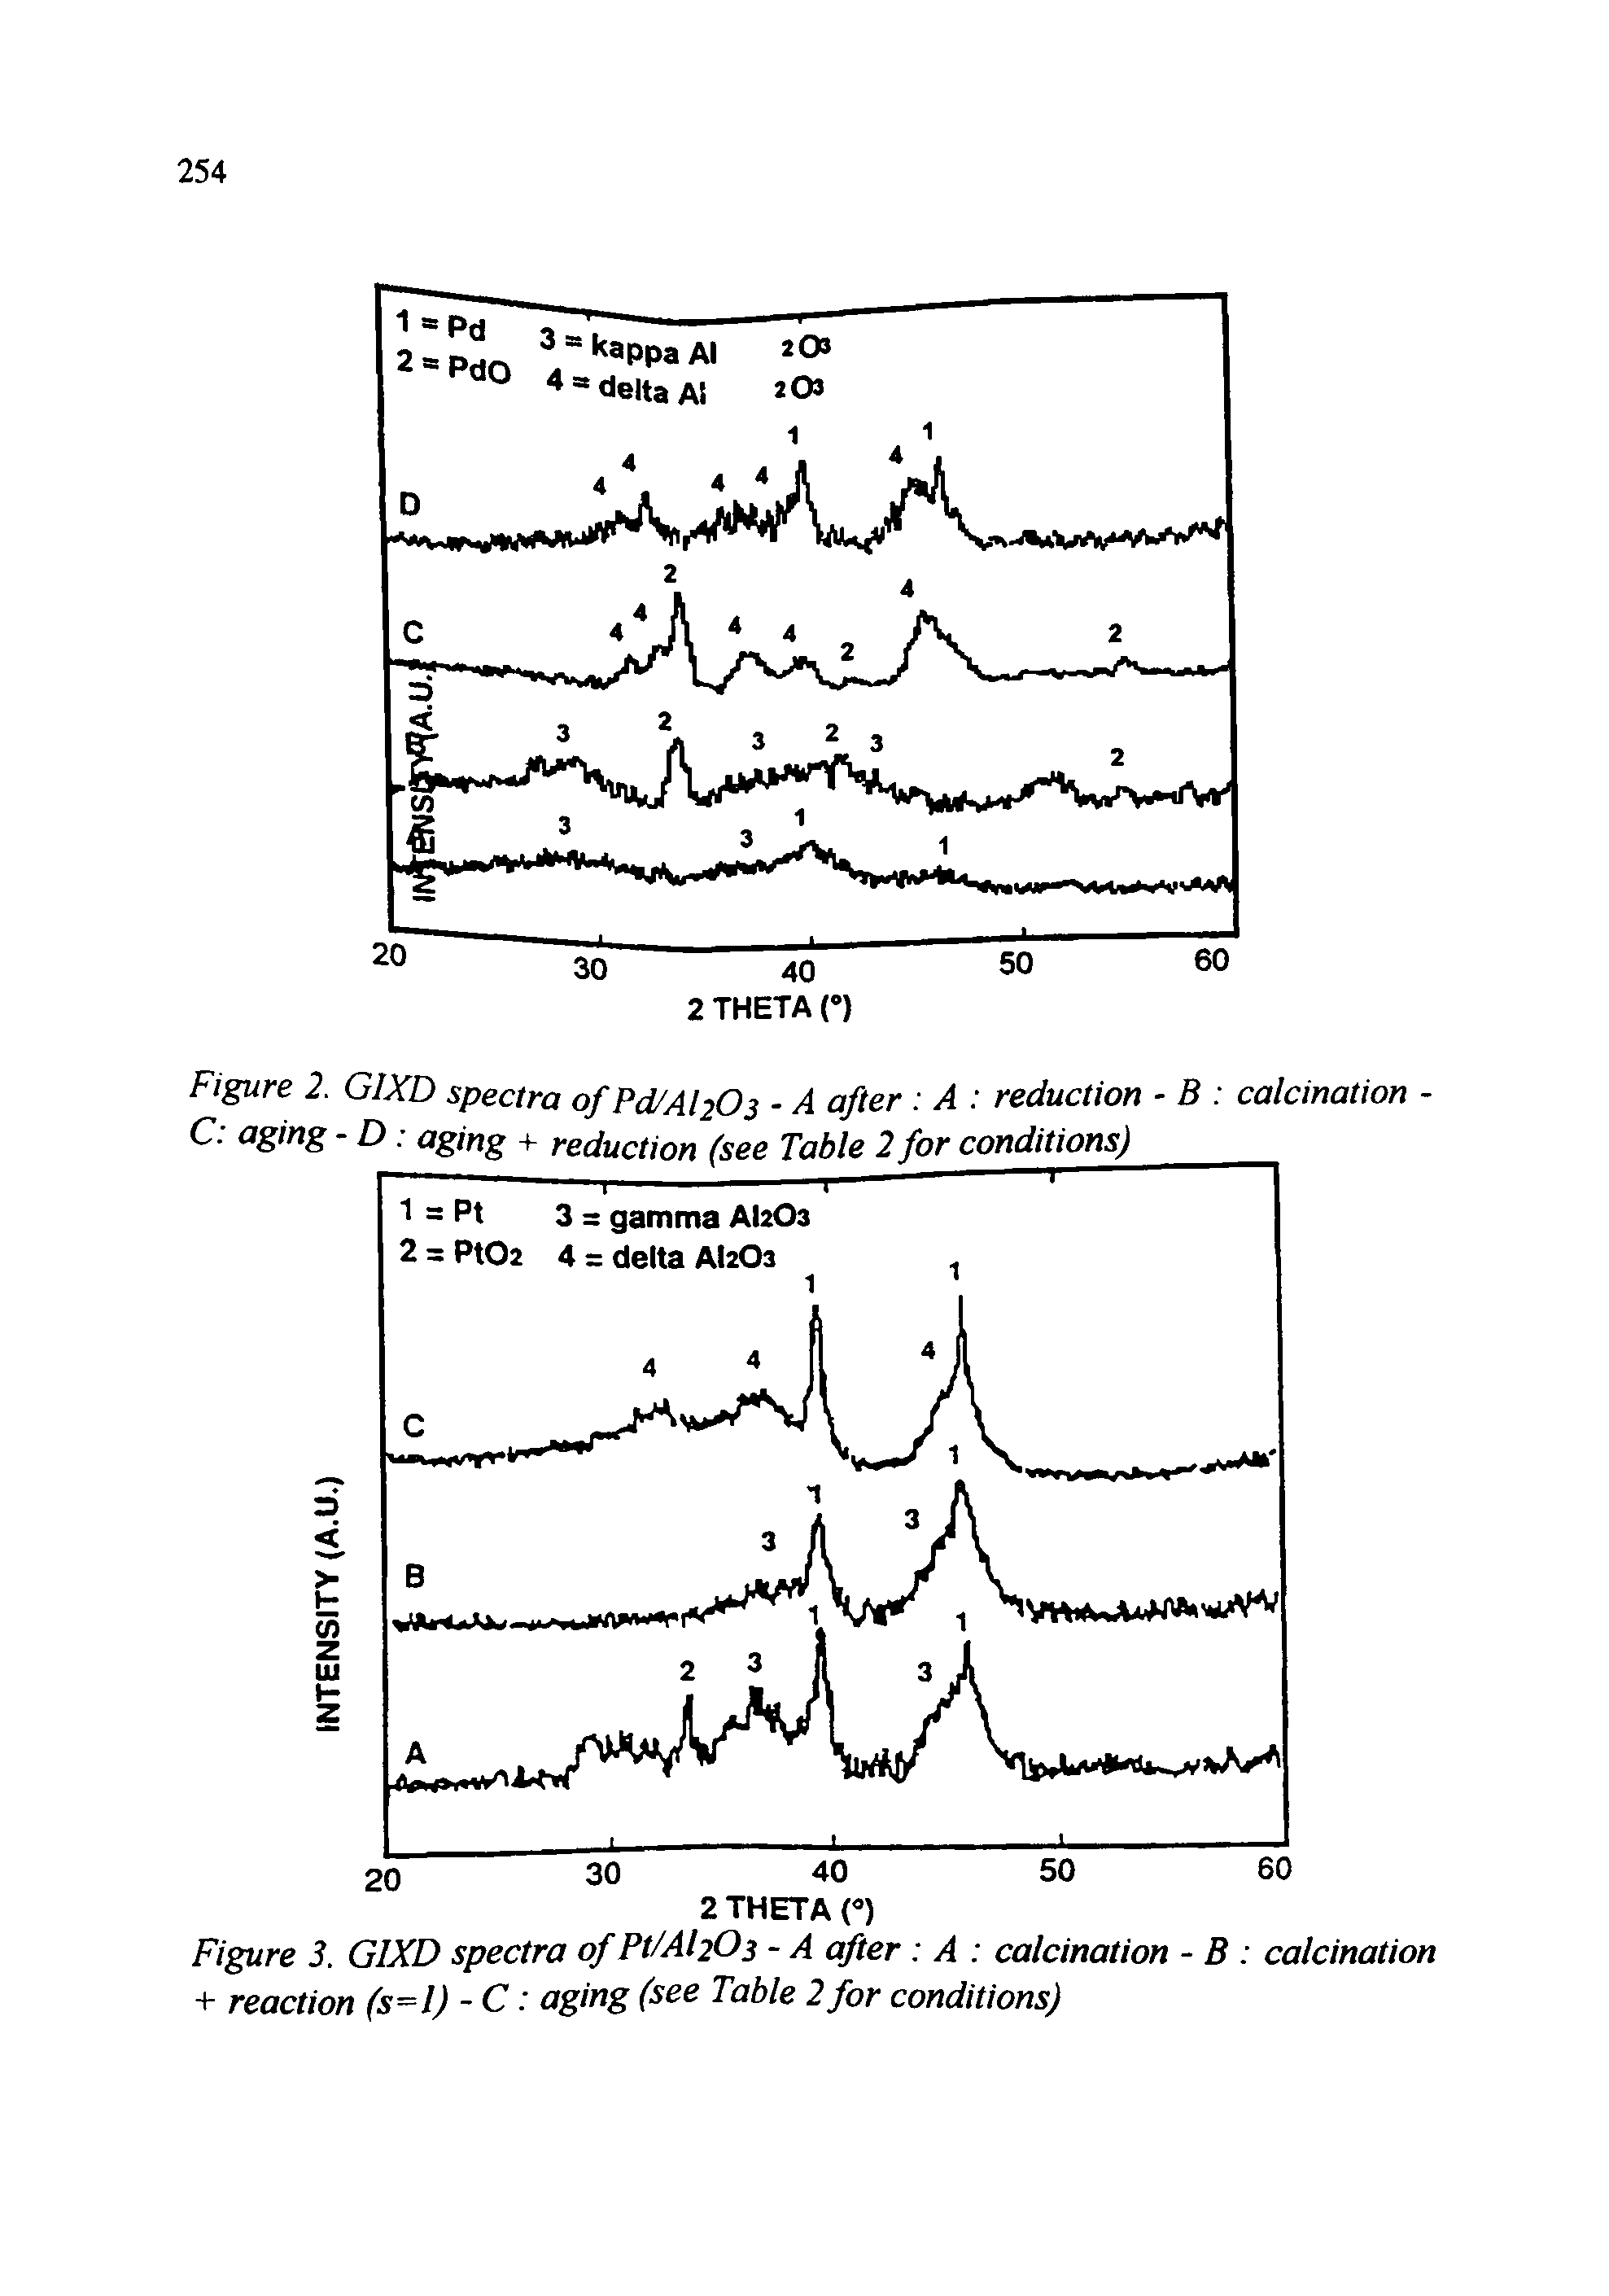 Figure 3. GIXD spectra of Pt/AhOs - A after A calcination - B calcination + reaction (s I) - C aging (see Table 2 for conditions)...